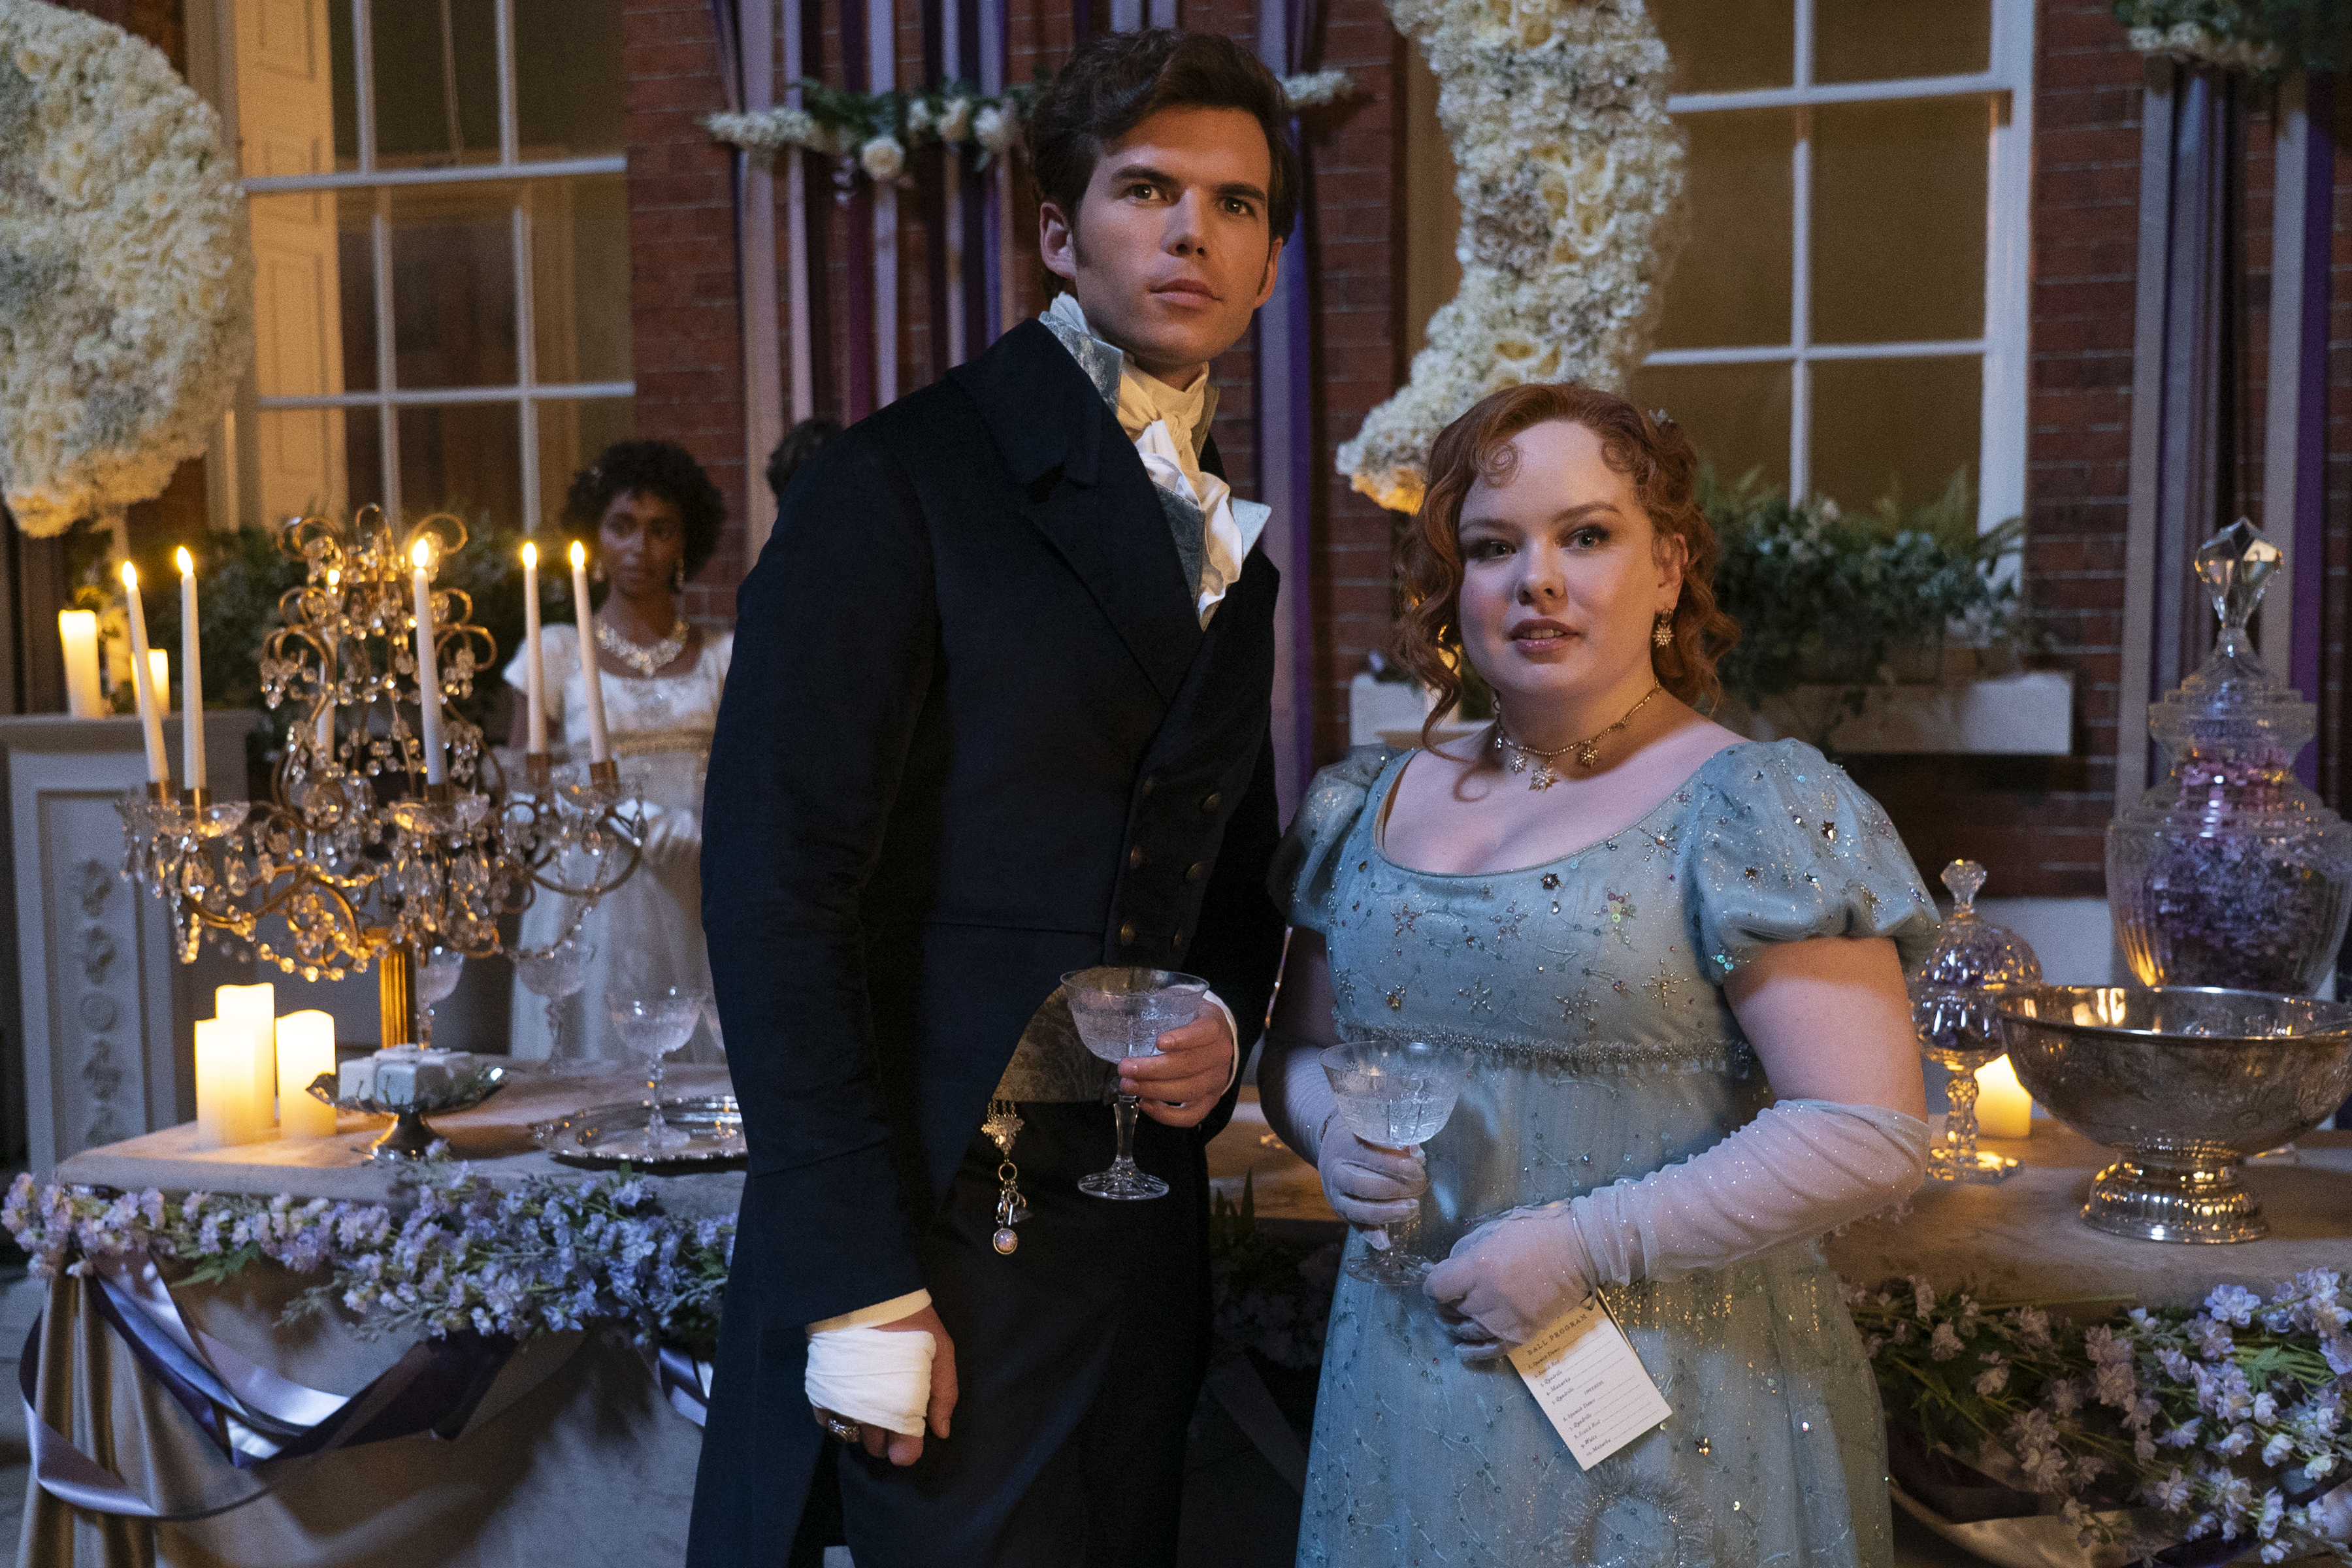 <p>Luke Newton plays Colin Bridgerton and Nicola Coughlan plays Penelope Featherington in episode 2, season 3 of "Bridgerton," which debuts on Netflix on May 16, 2024.</p><p>According to Nicola, the season 3 lead, this next installment has evolved. "I always look at the three seasons like this. I think season 1 was about passion, season 2 was about longing and season 3, I think it's romance all the way," she told People magazine. "It's just so romantic."</p><p>According to the Irish actress, "There were a lot of moments on set where we filmed something and we'd turn around and everyone was sort of clutching their chest being like 'Oh my God.' It was that kind of love."</p>